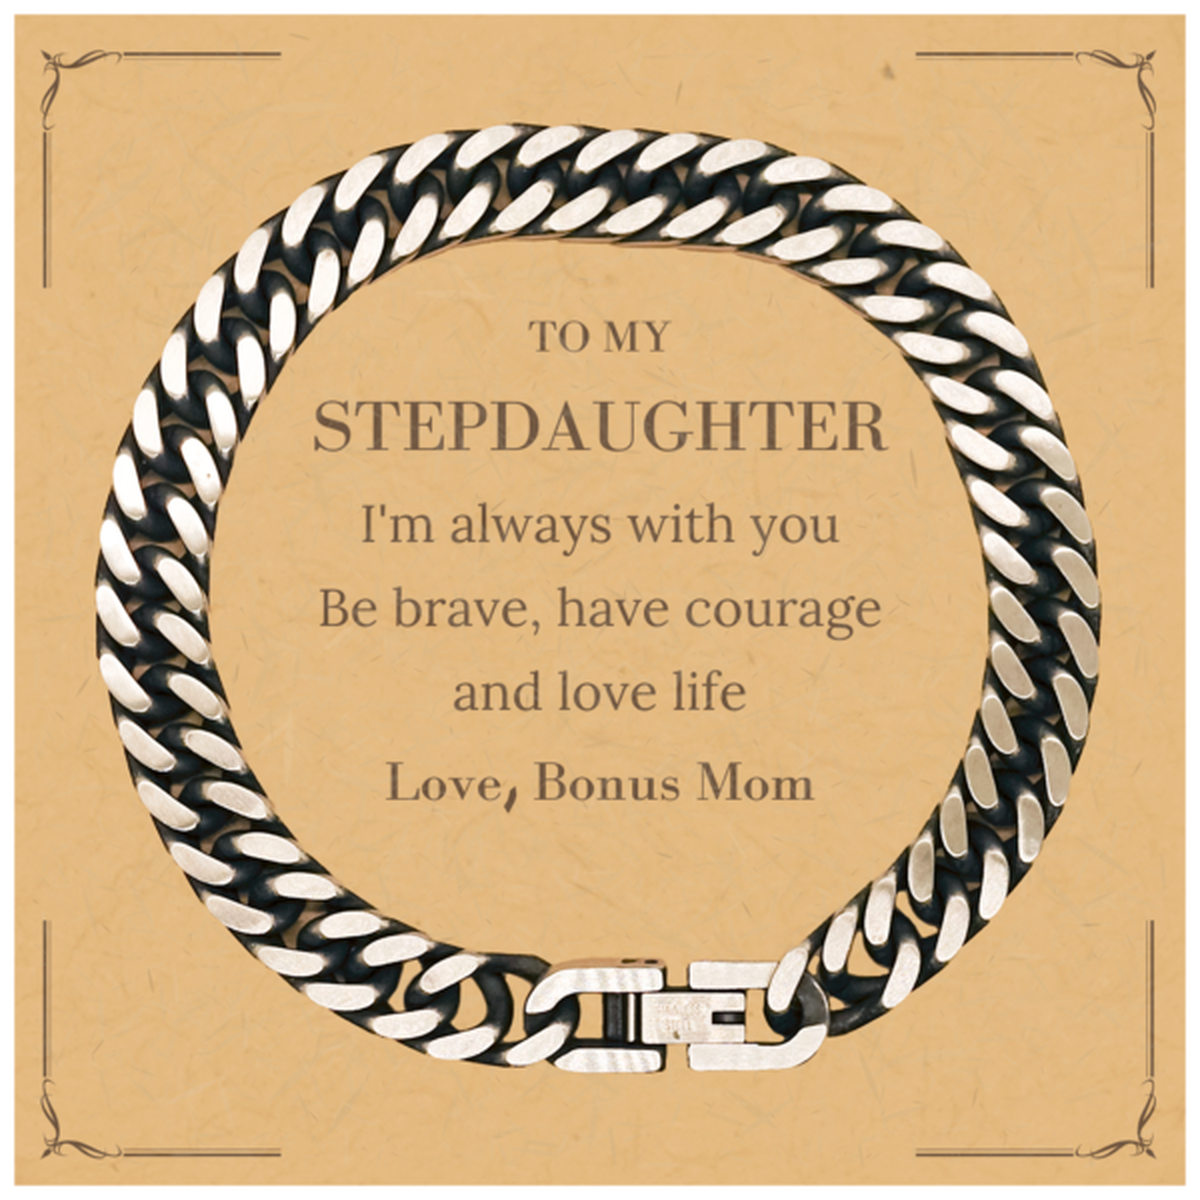 To My Stepdaughter Gifts from Bonus Mom, Unique Cuban Link Chain Bracelet Inspirational Christmas Birthday Graduation Gifts for Stepdaughter I'm always with you. Be brave, have courage and love life. Love, Bonus Mom